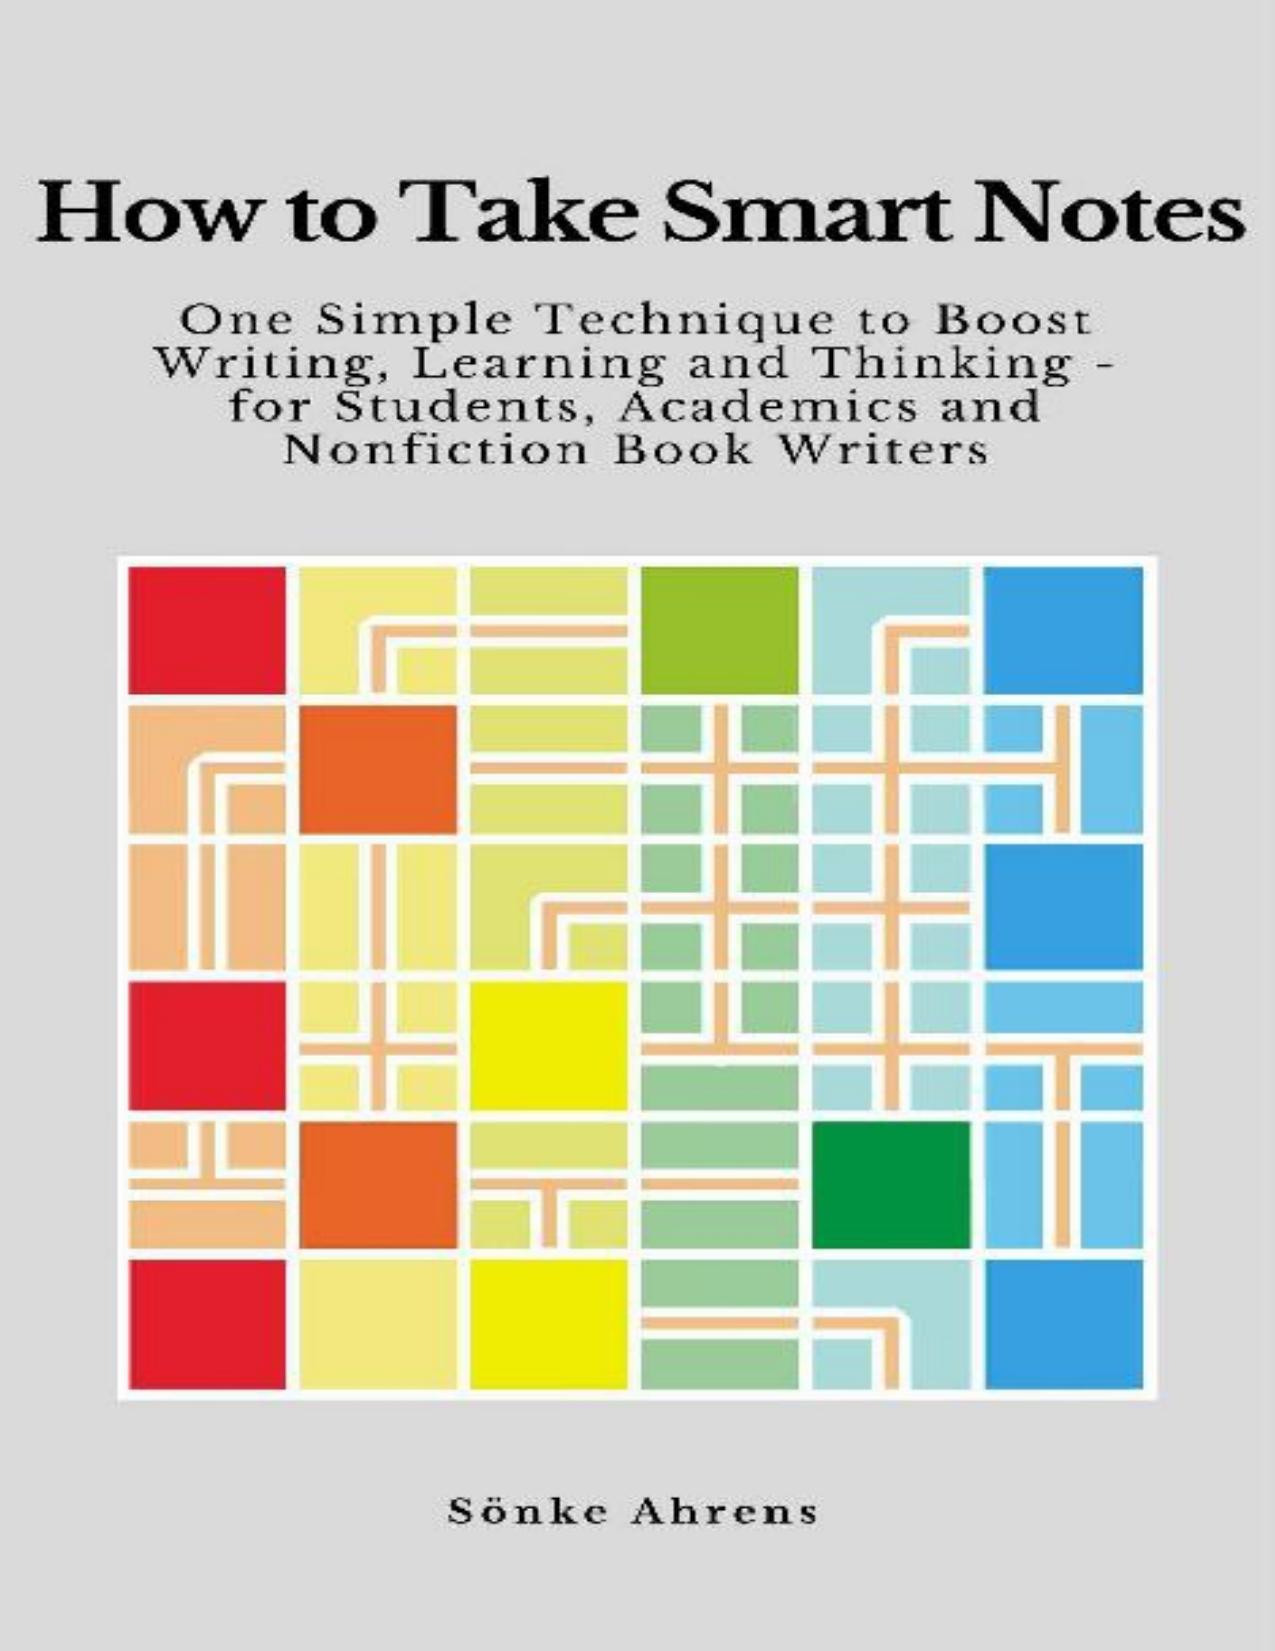 How to Take Smart Notes: One Simple Technique to Boost Writing, Learning and Thinking â for Students, Academics and Nonfiction Book Writers by Sönke Ahrens